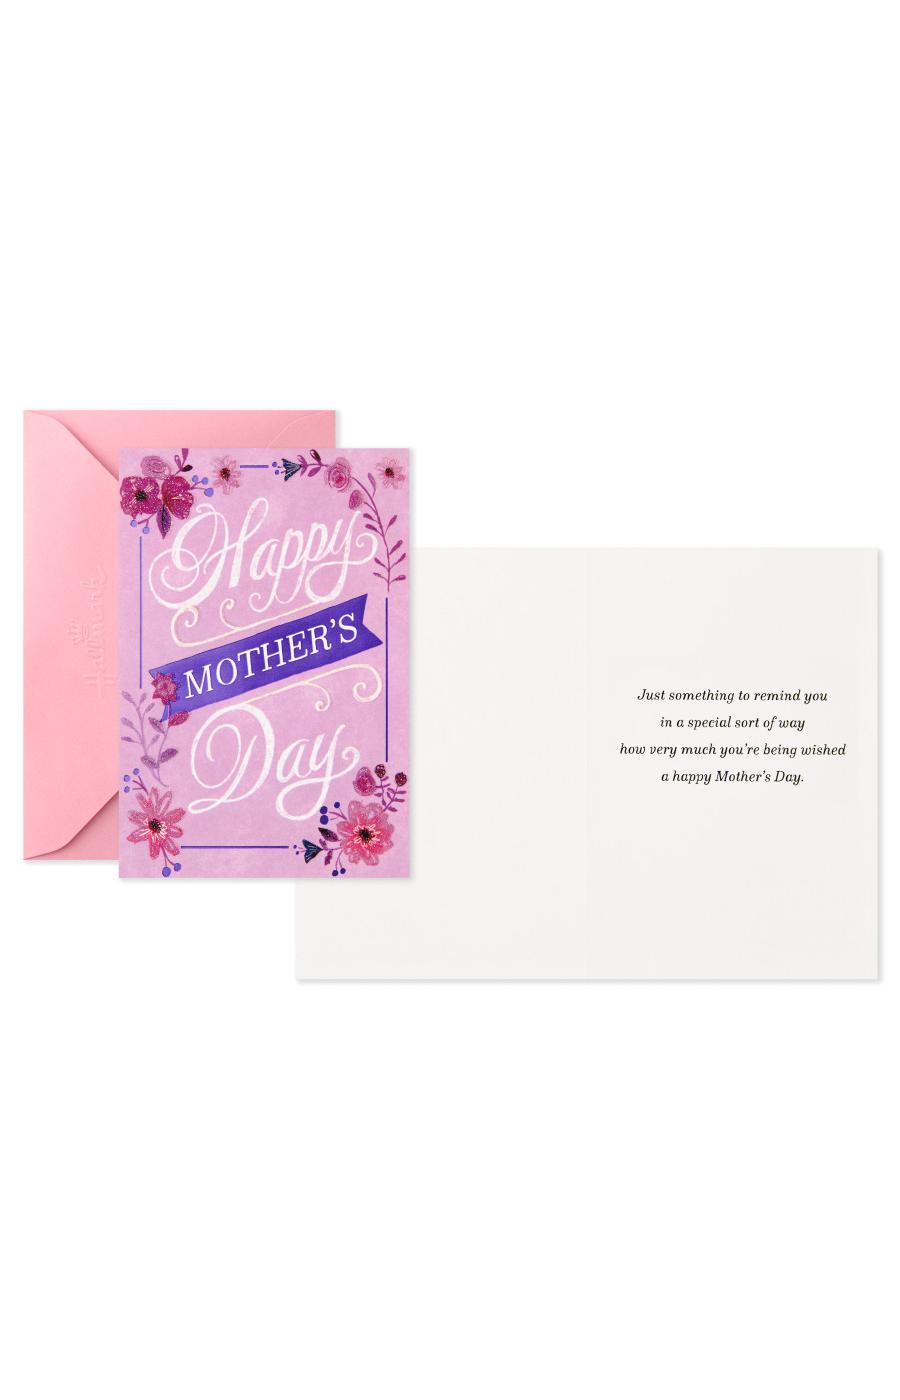 Hallmark Remembering You Assorted Mother's Day Cards with Envelopes - S6, S3; image 7 of 7